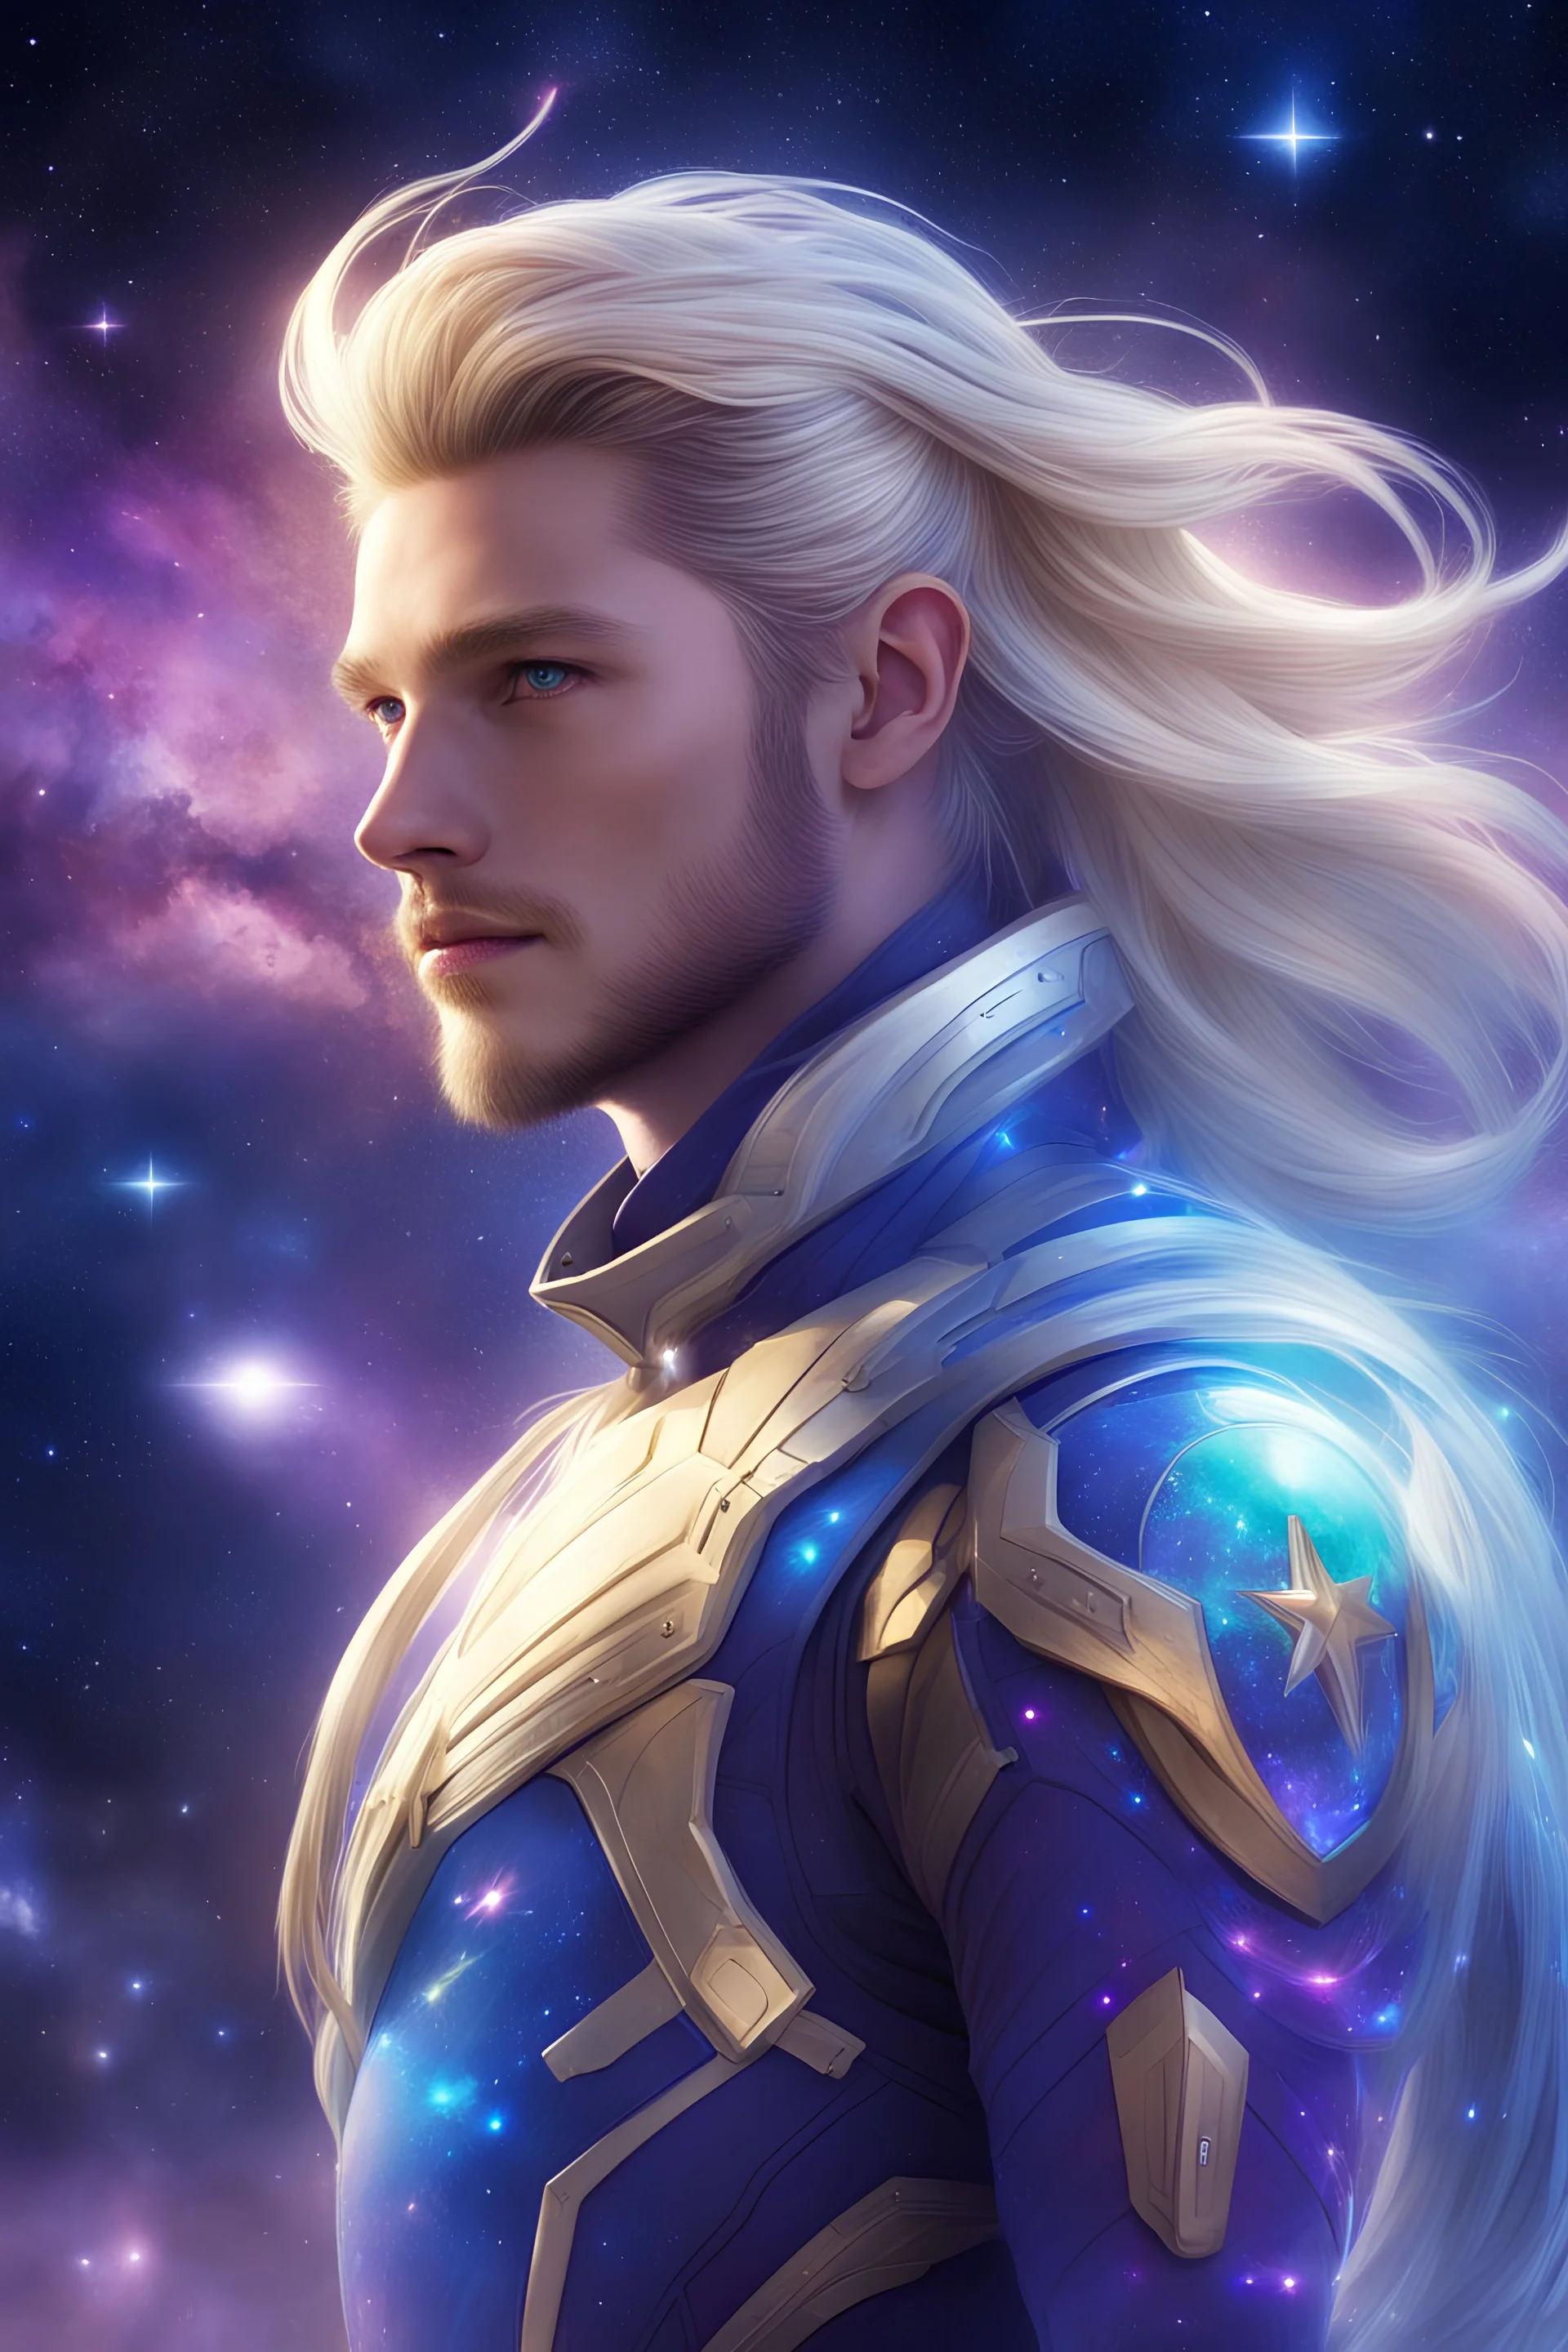 handsome man, cosmic traveler,guardian of galaxy, cosmic uniform gold, blue, purple wings, long hair, ponytail, blonde, white, blue highlights, space background, stars, milkyway, aurora lights